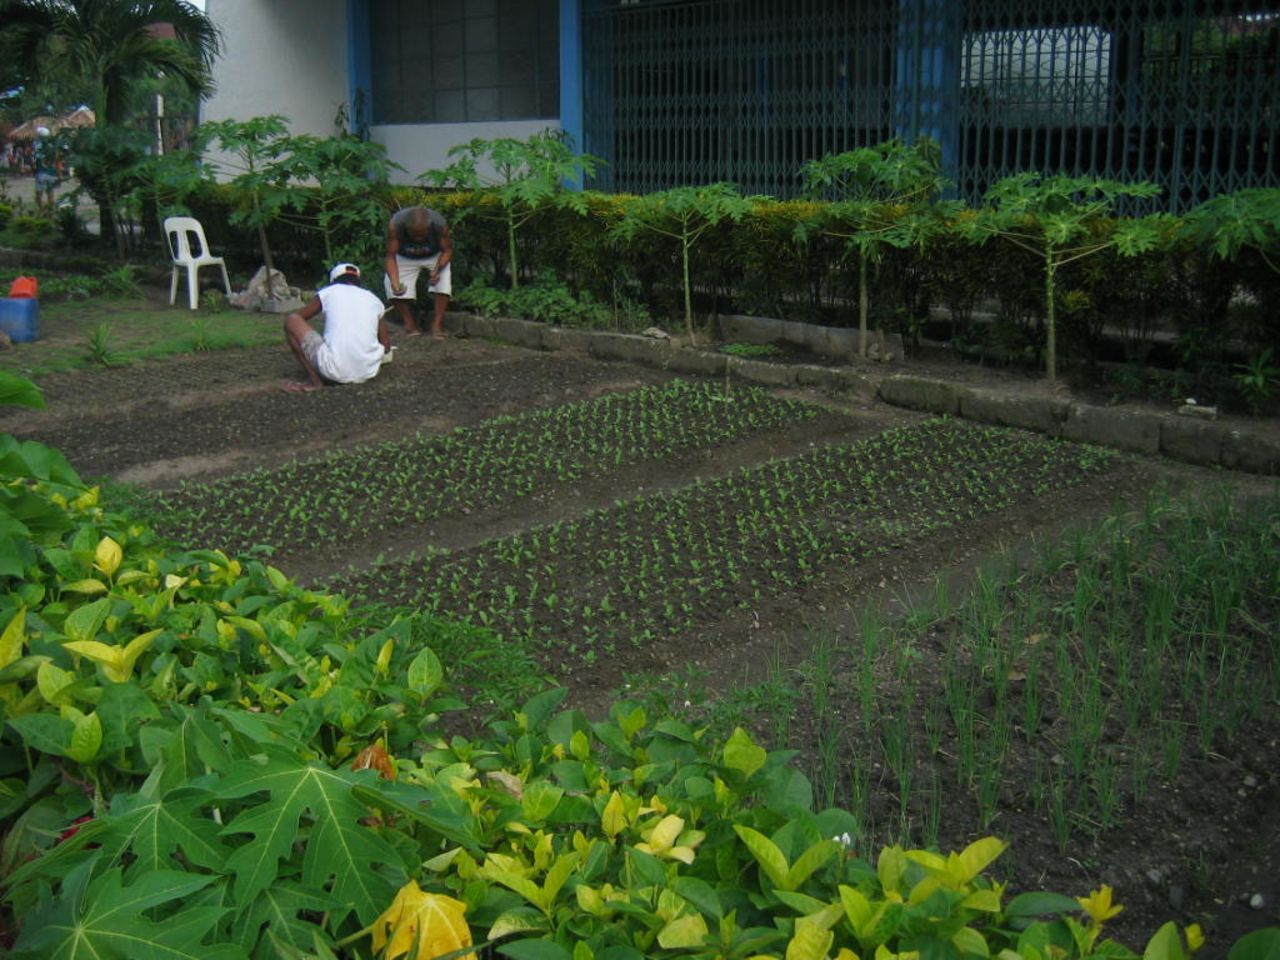 Backyard gardening is another example of how inmates are taking control of available resources to meet their needs. Narag says inmates develop free space into gardens to supplement their food intake.